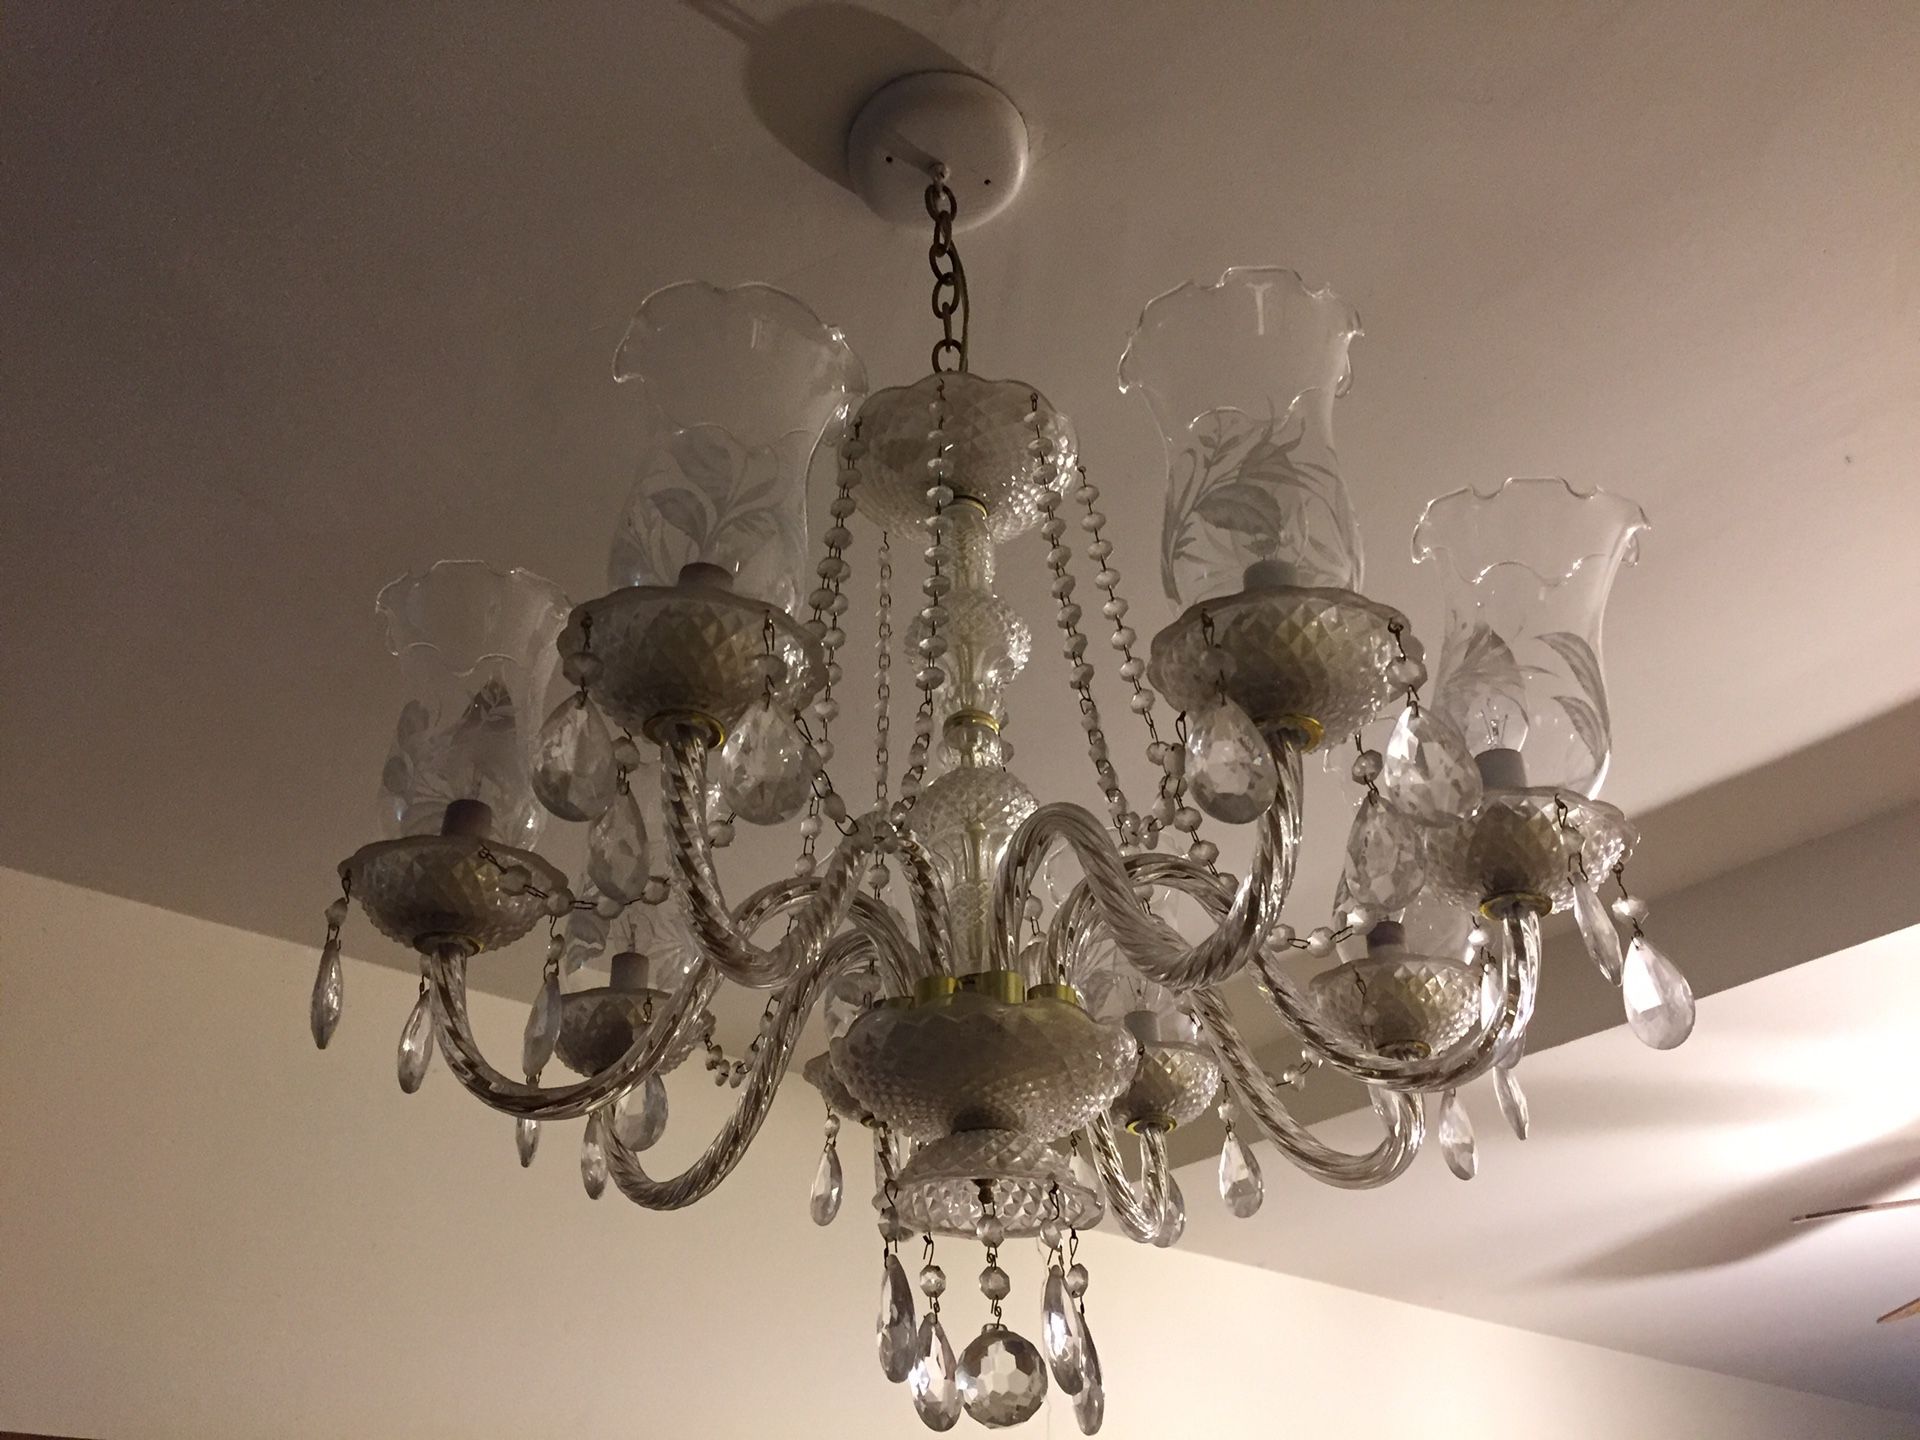 Chandelier glass or crystal drops